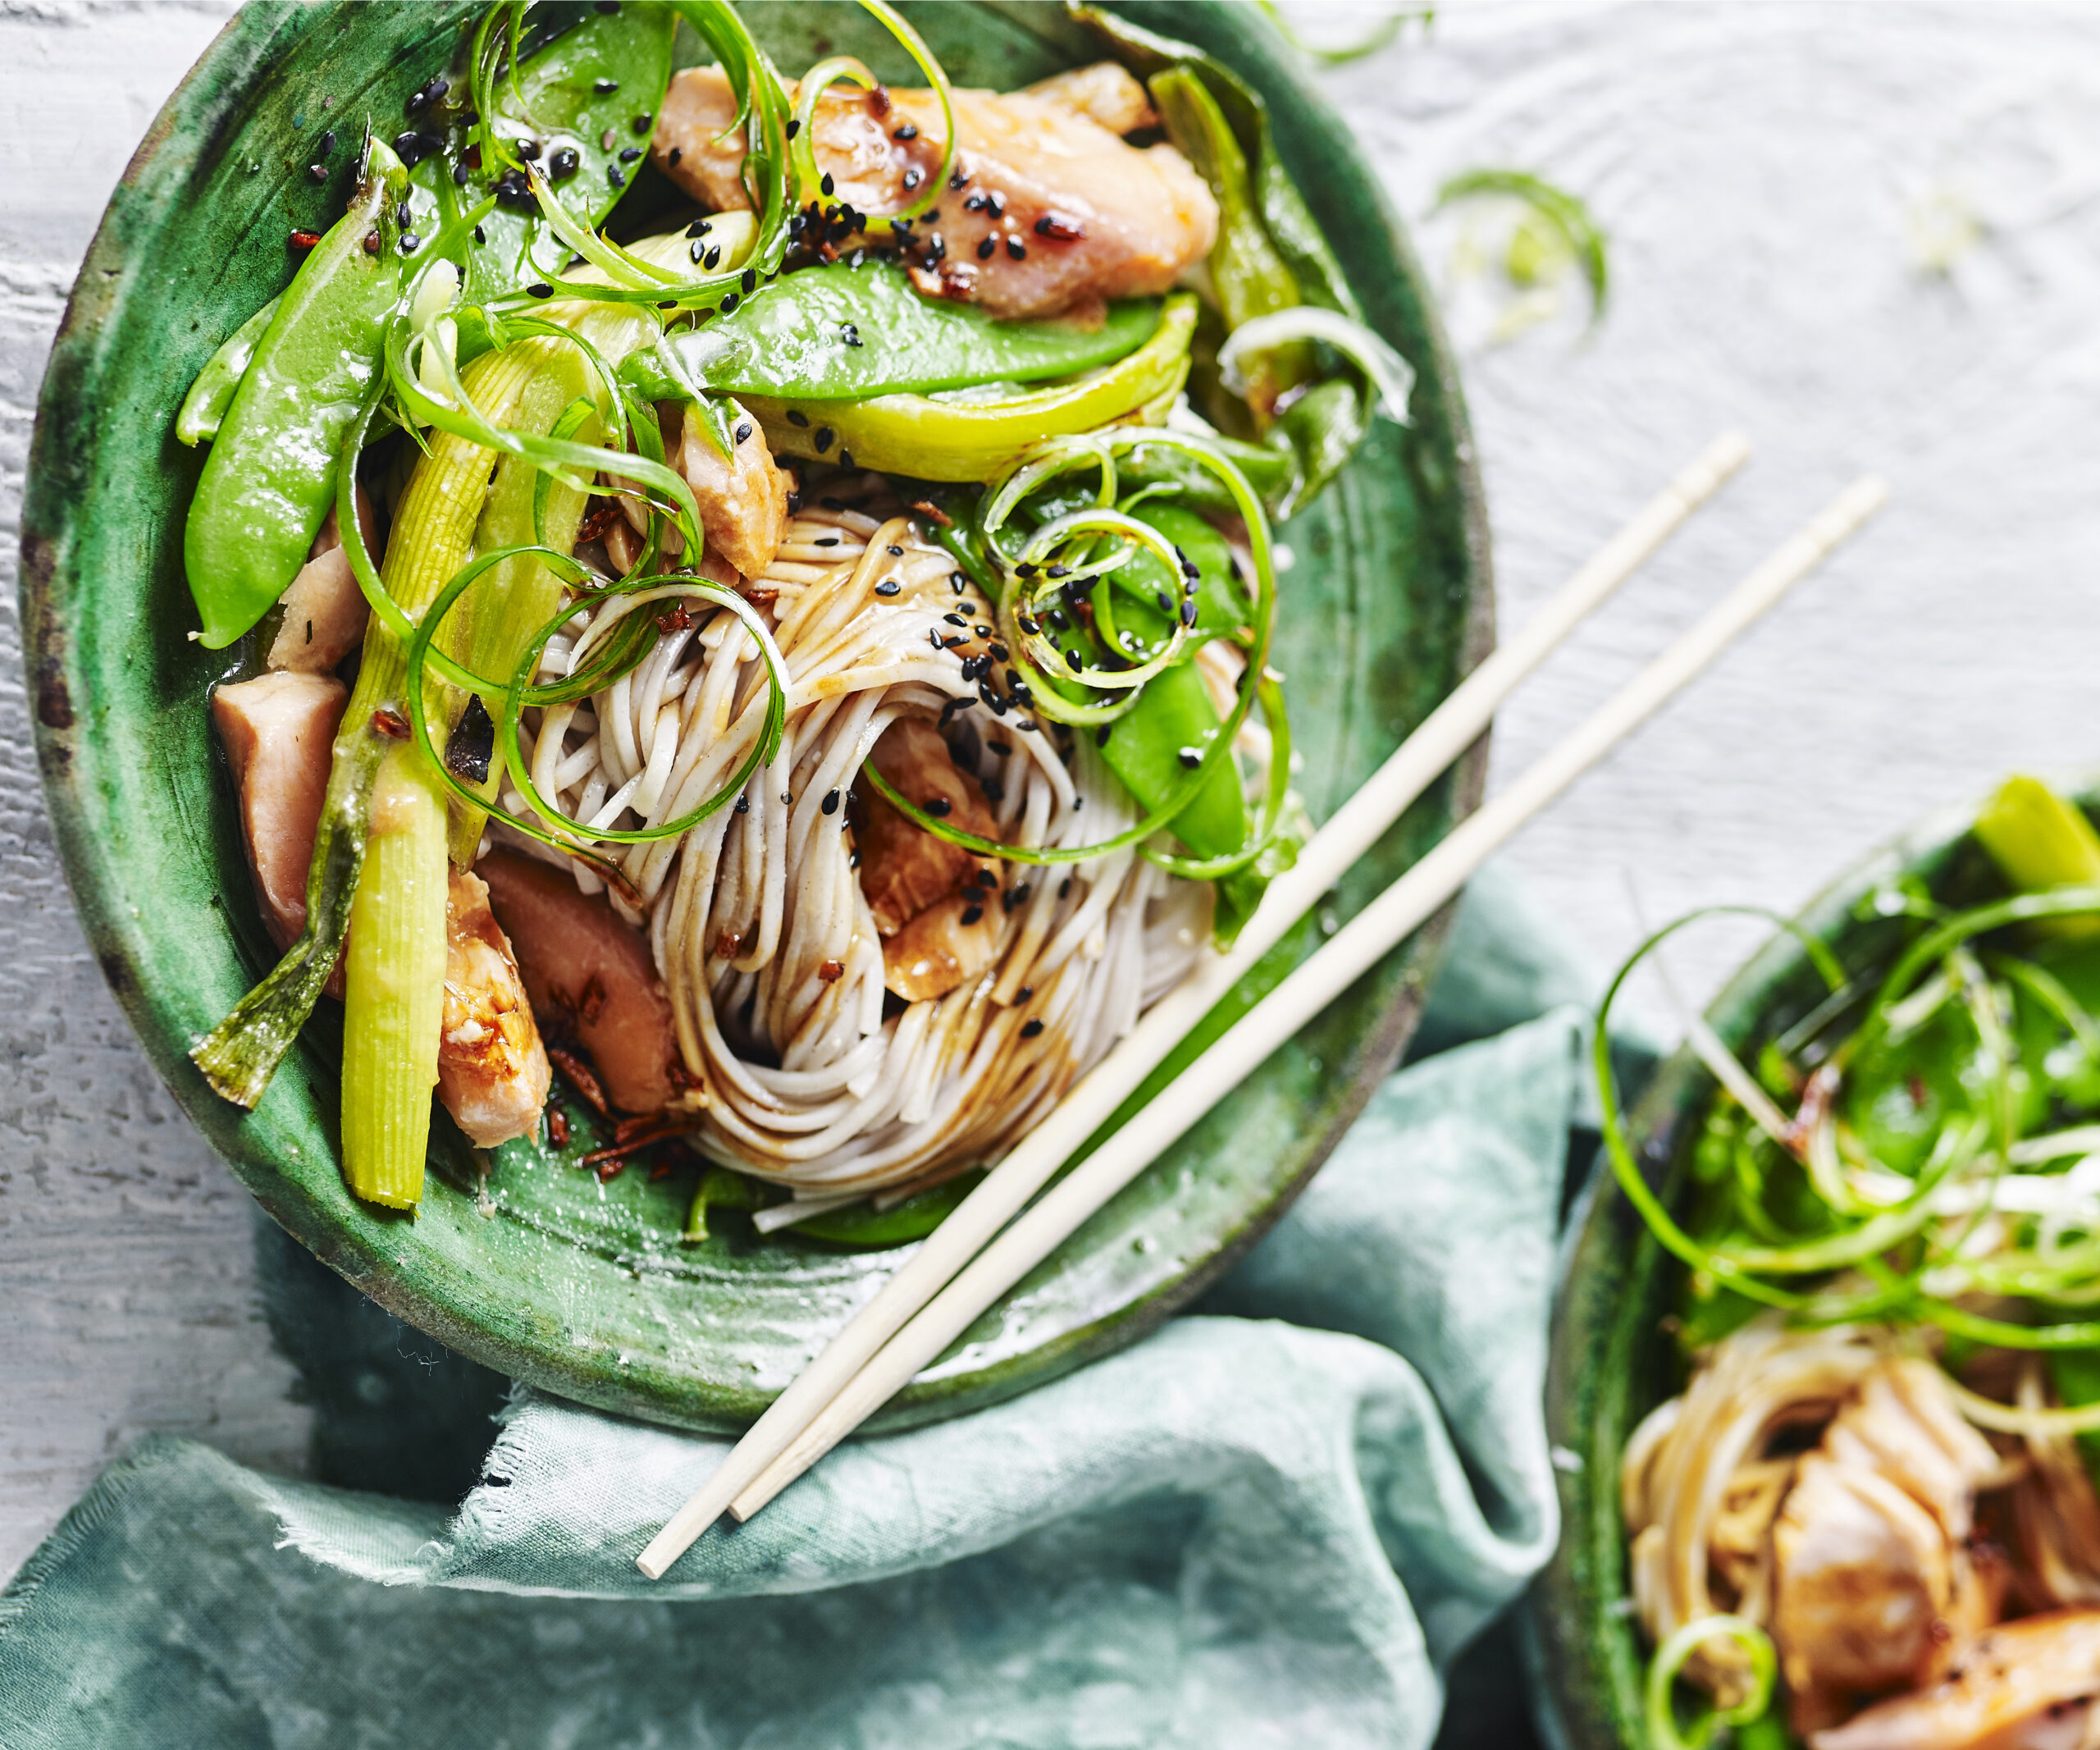 Miso and sesame salmon with soba noodles